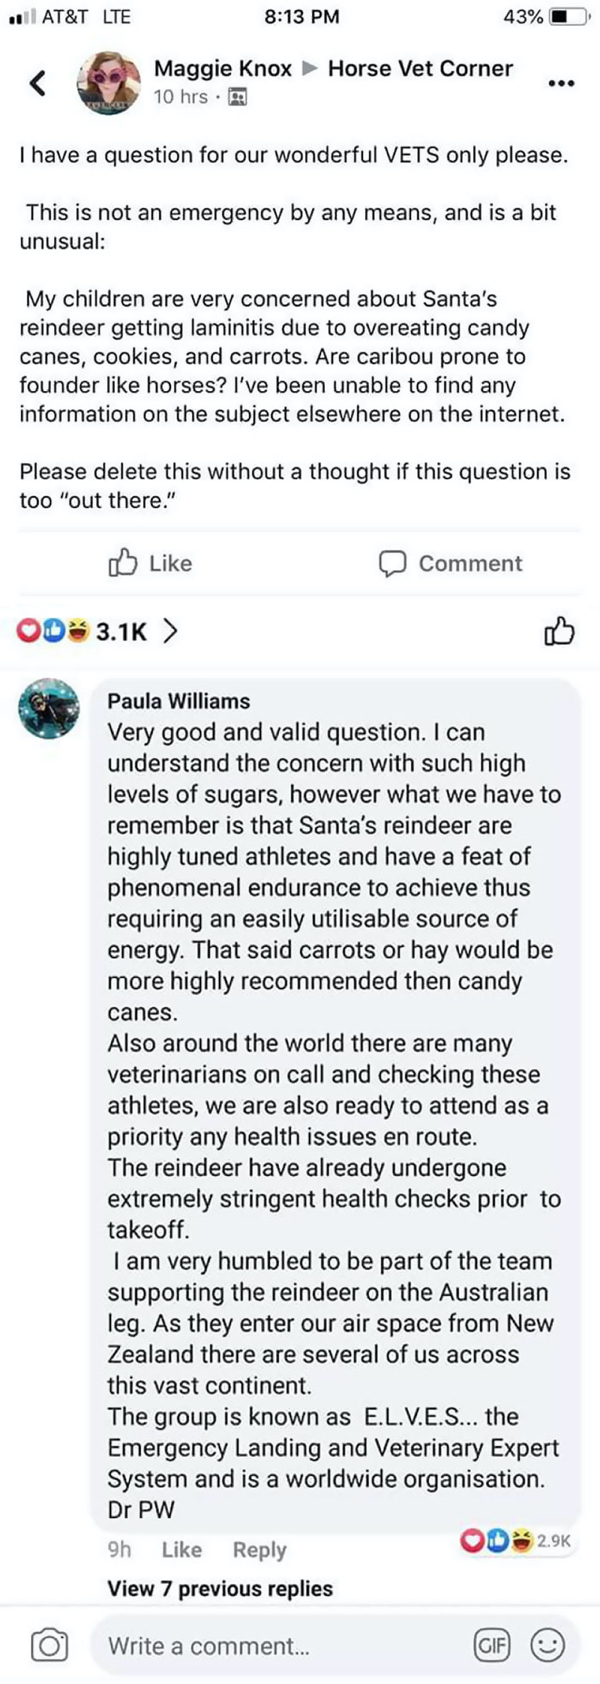 wholesome pics and memes - paper - Atat De 515 Pm Maggie Knox Horse Vet Corner I have a question for our wonderlu Vets only please This is not an emergency by any means, and is a bit My children are very concerned about it reindeer getting is due to overe